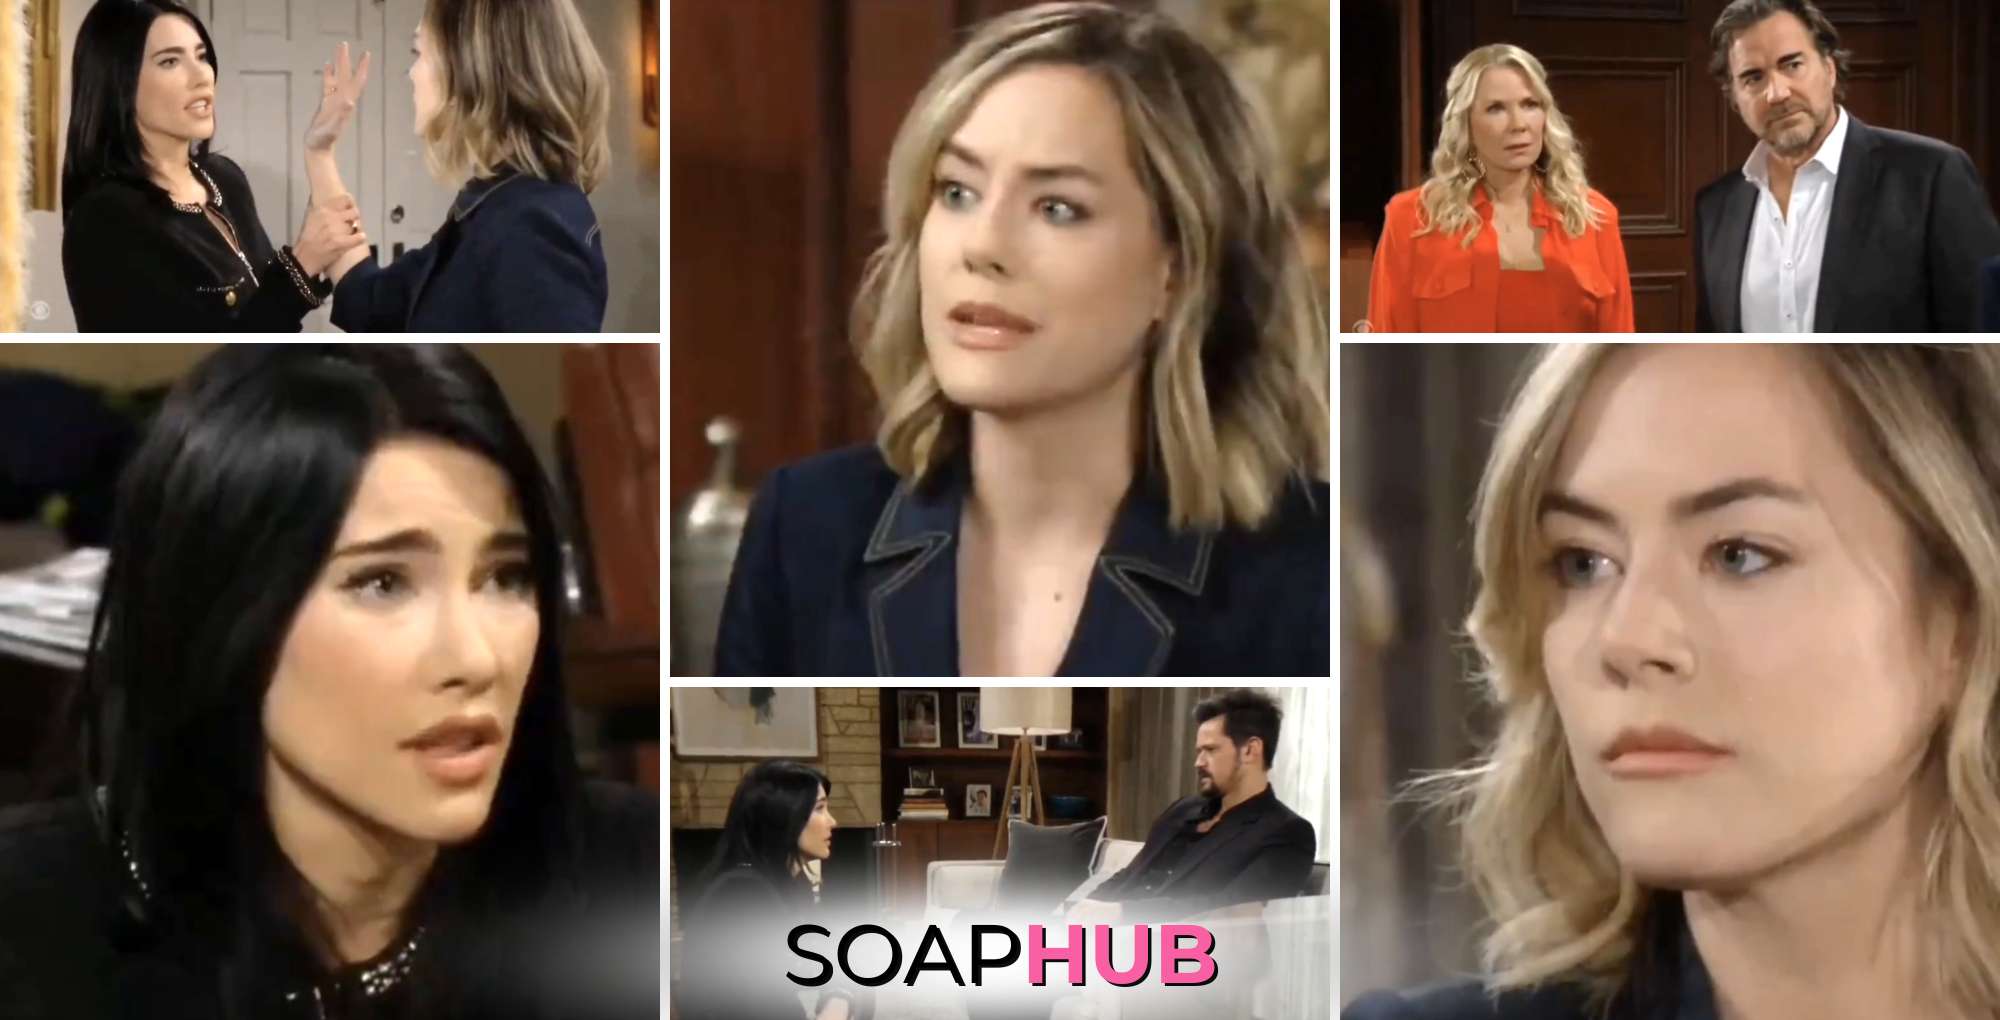 Collage of The Bold and the Beautiful spoilers video with the Soap Hub logo across the bottom.